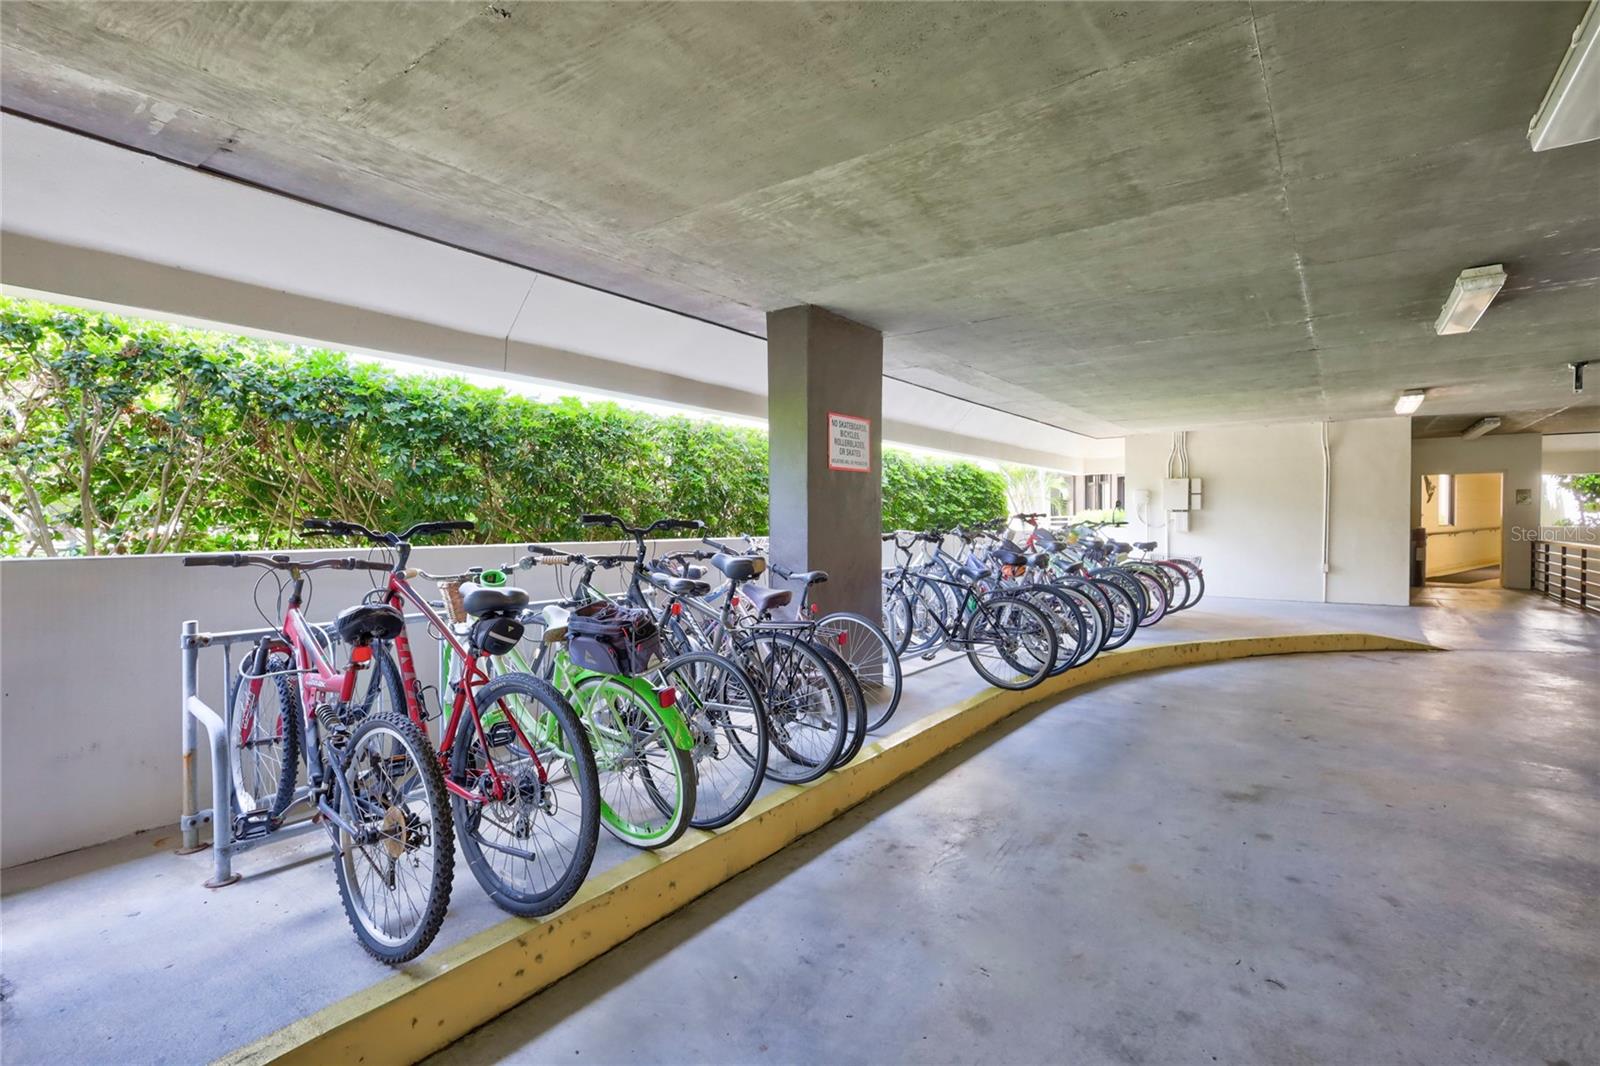 Garage bike rack + open entrance walk on left to private pool, also grocery cart storage closet, and covered wide walk way to keyed Lobby & 2 elevators.